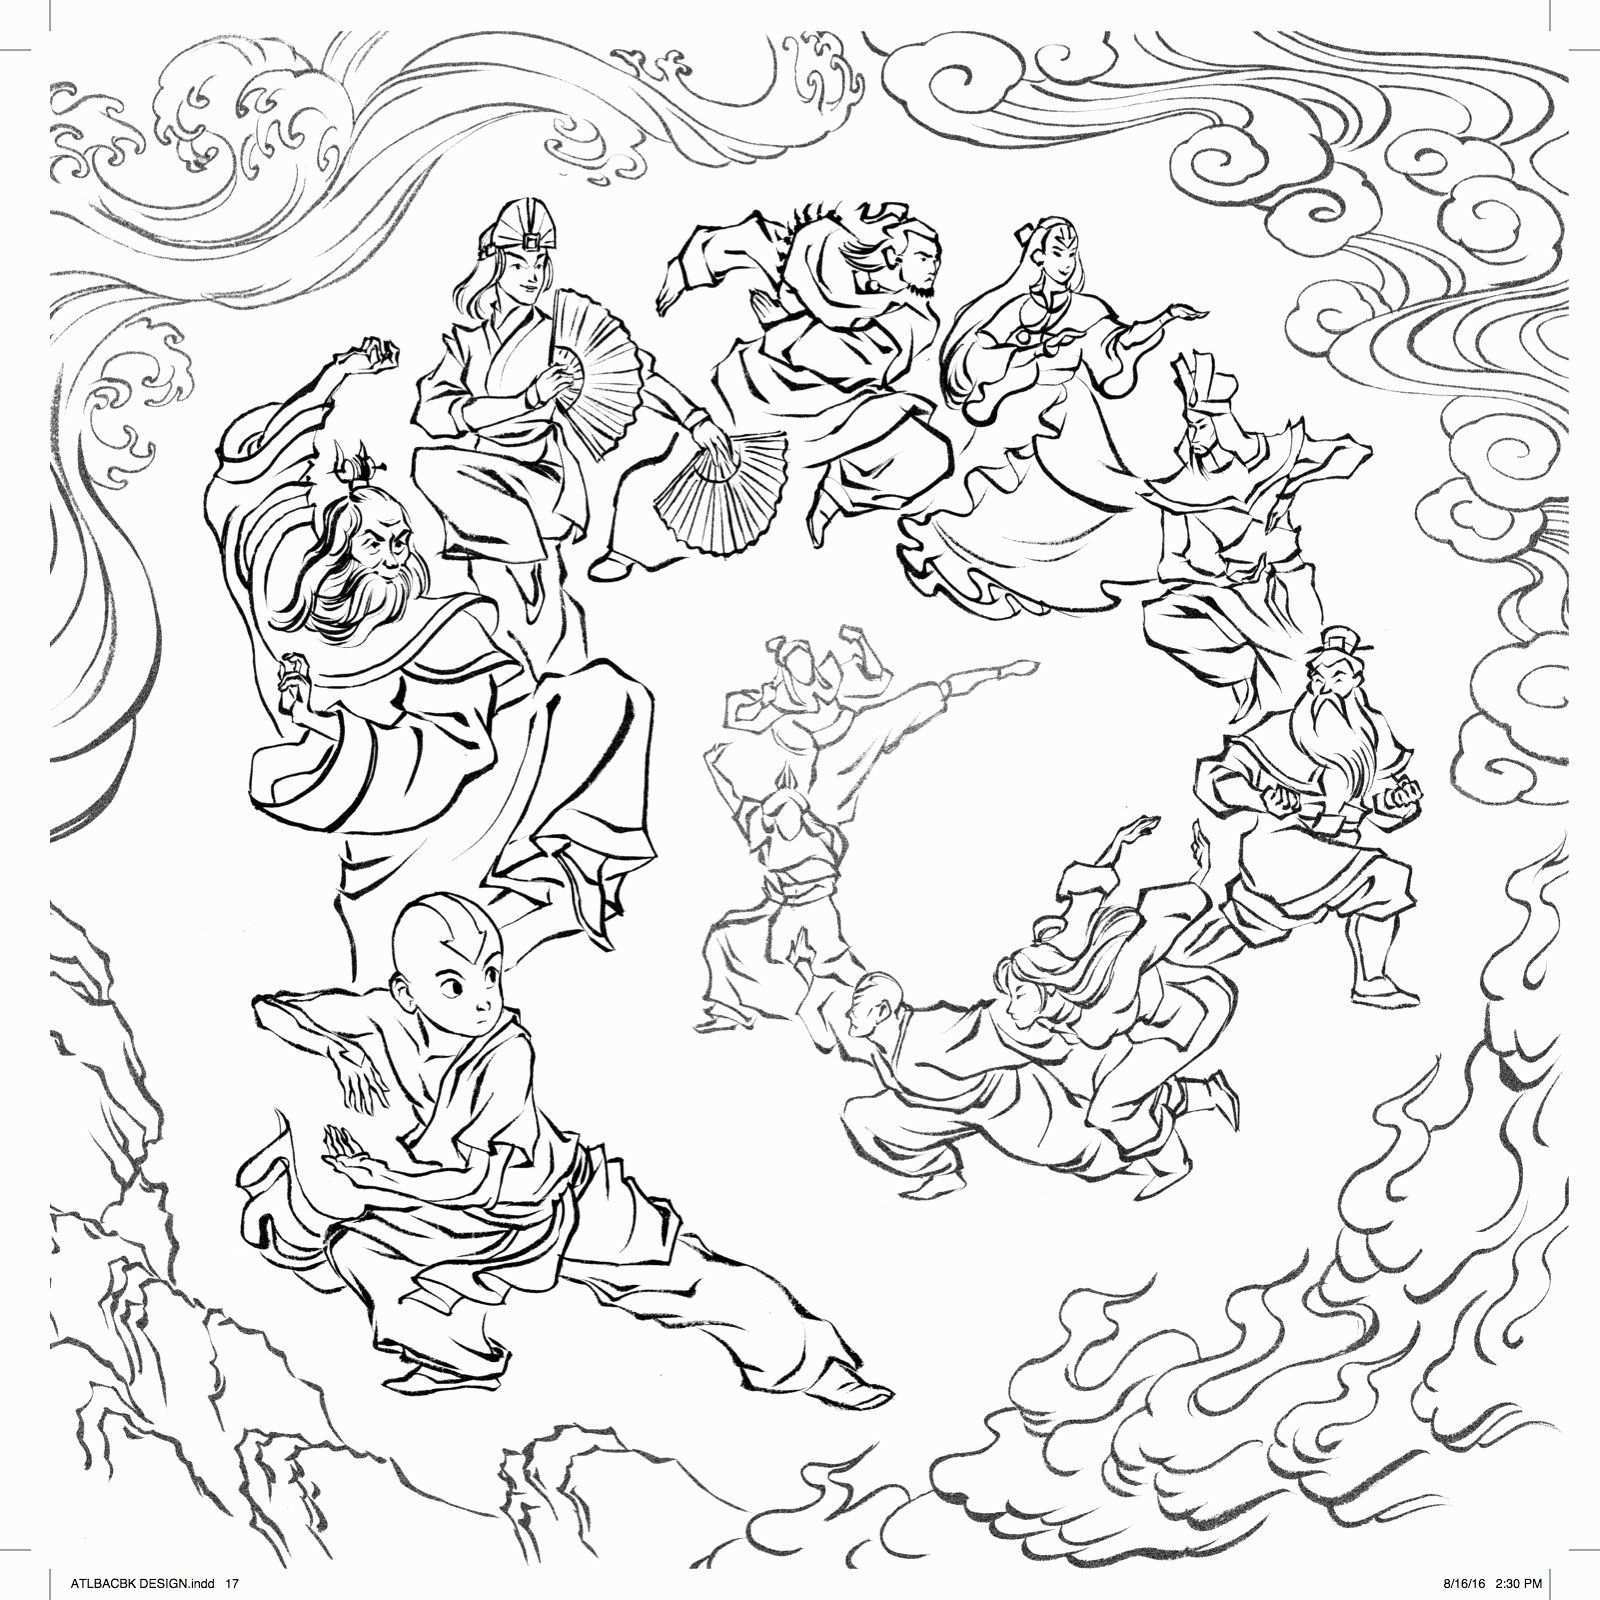 Avatar The Last Airbender Coloring Book Awesome Avatar Month 2016 Coloring Contest Bl